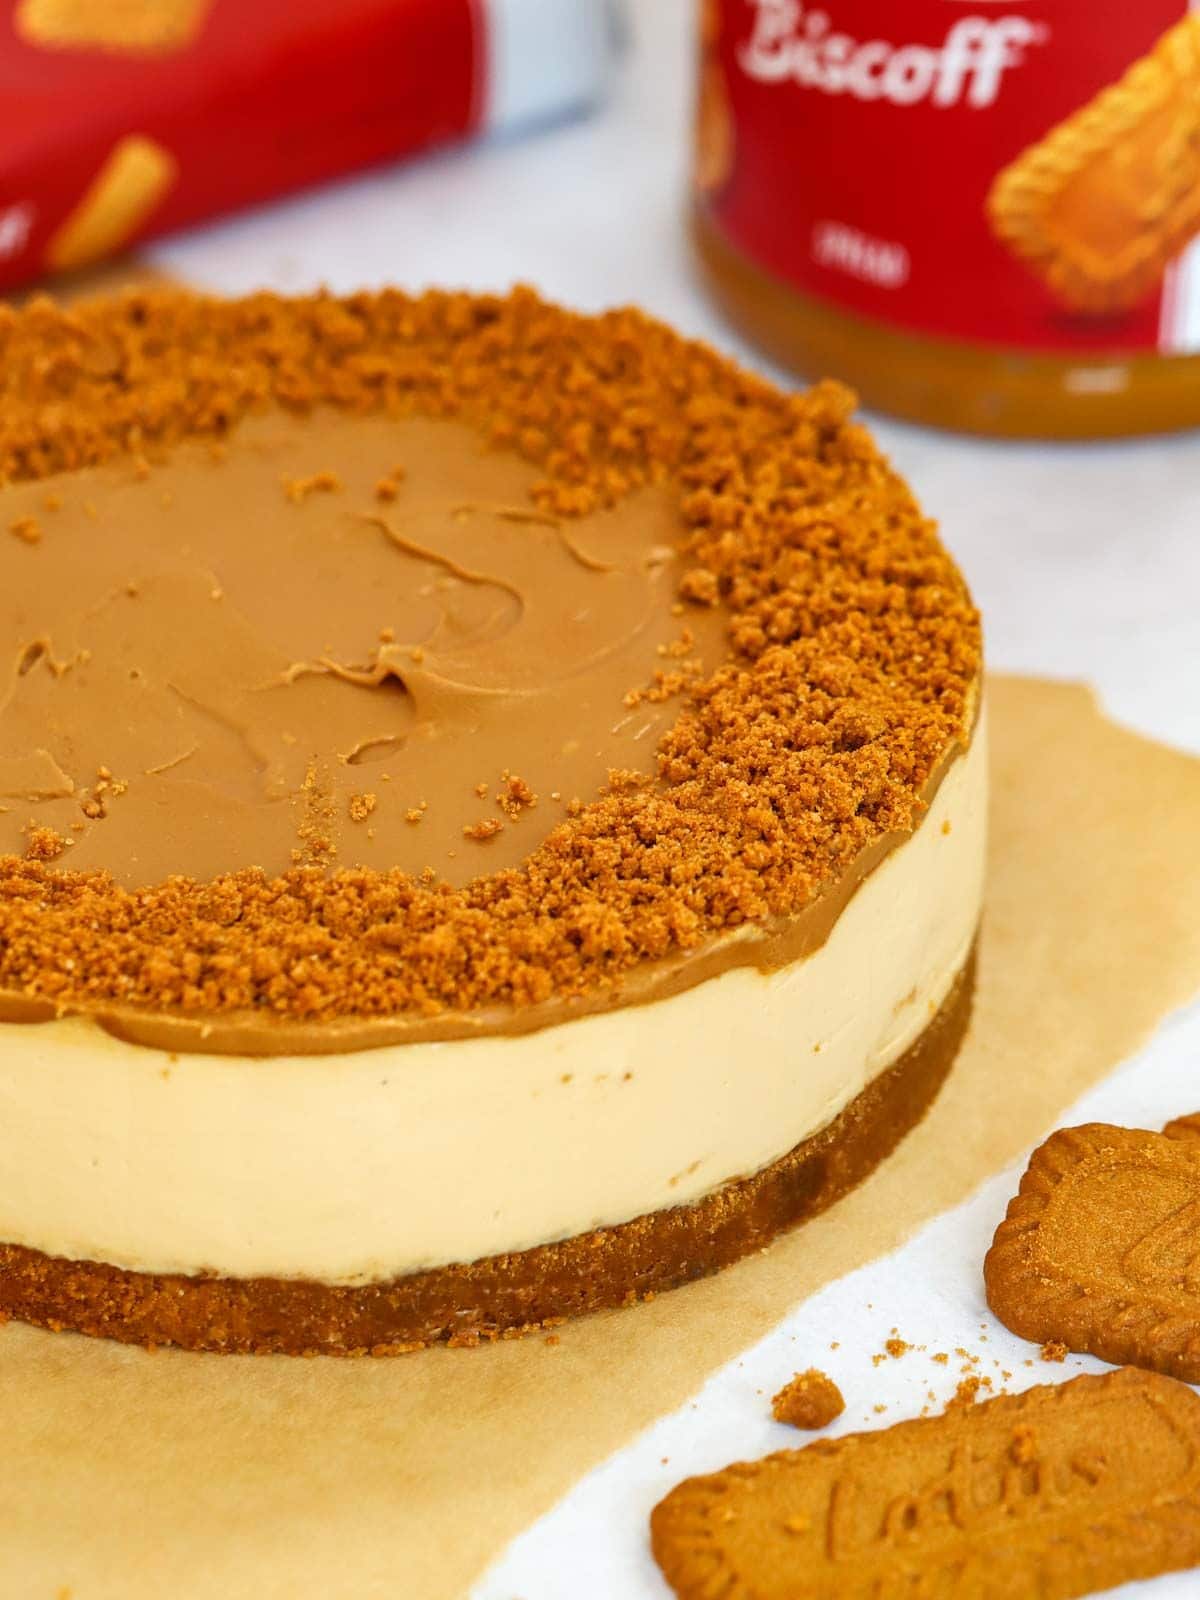 A Biscoff cheesecake on a table, ready to be served.